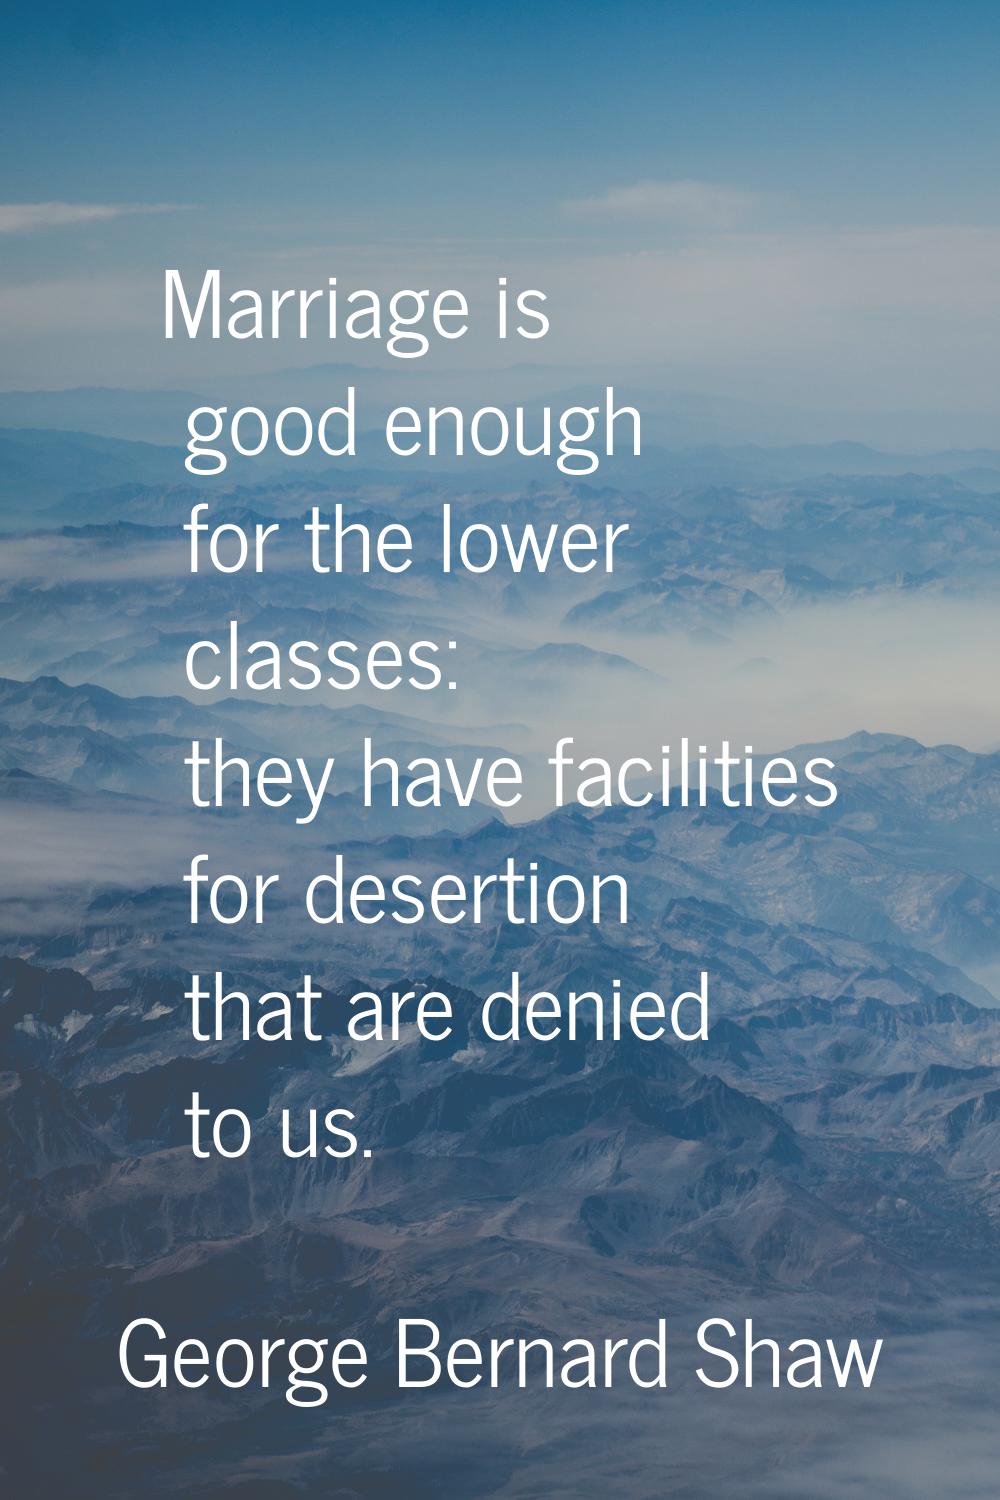 Marriage is good enough for the lower classes: they have facilities for desertion that are denied t